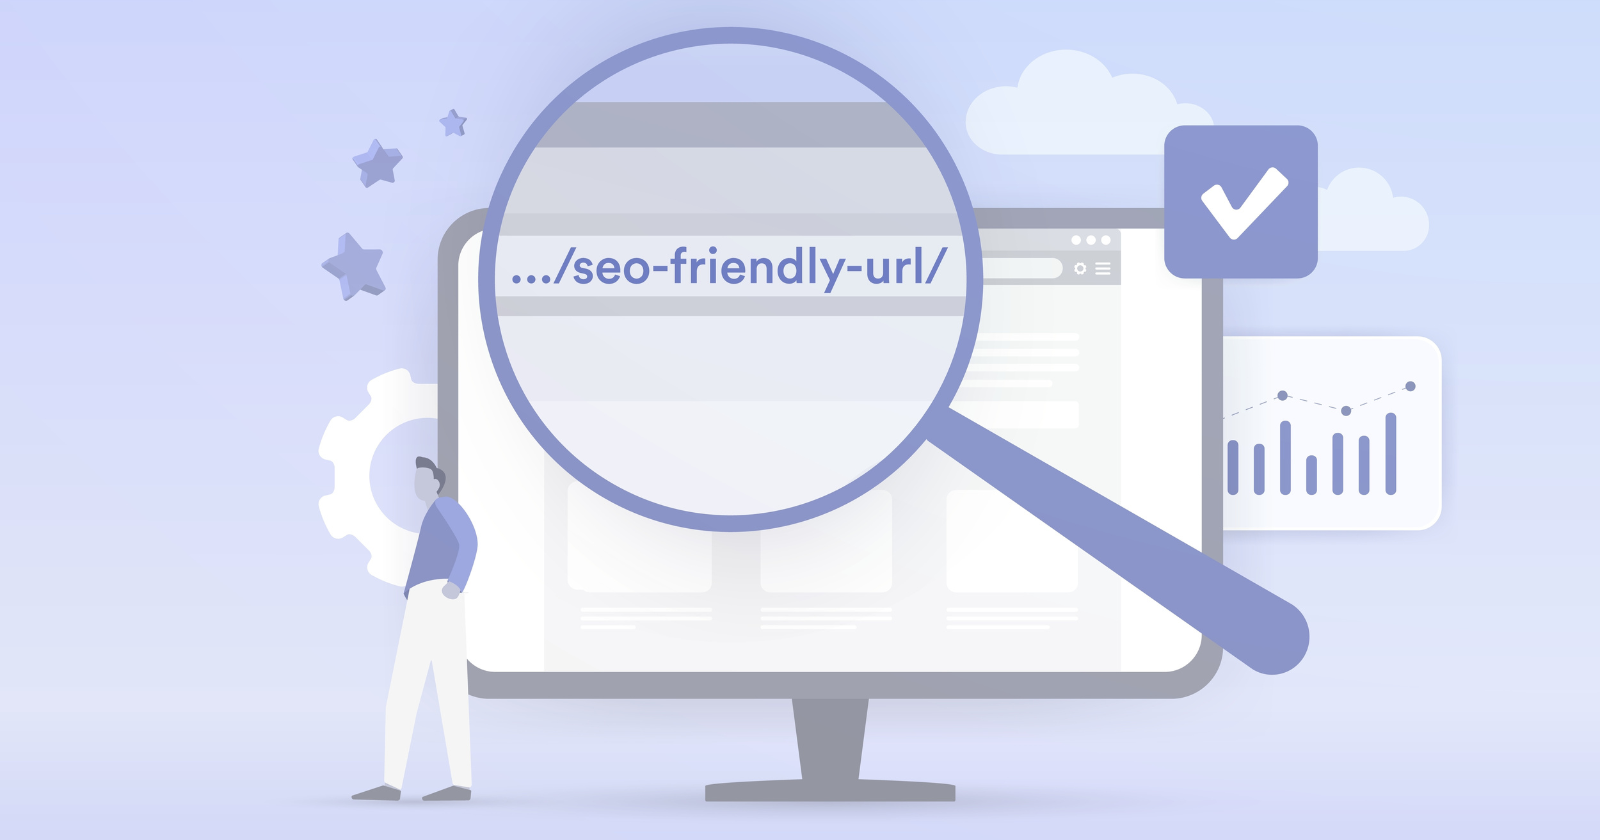 A Complete Guide To Site Taxonomy for SEO